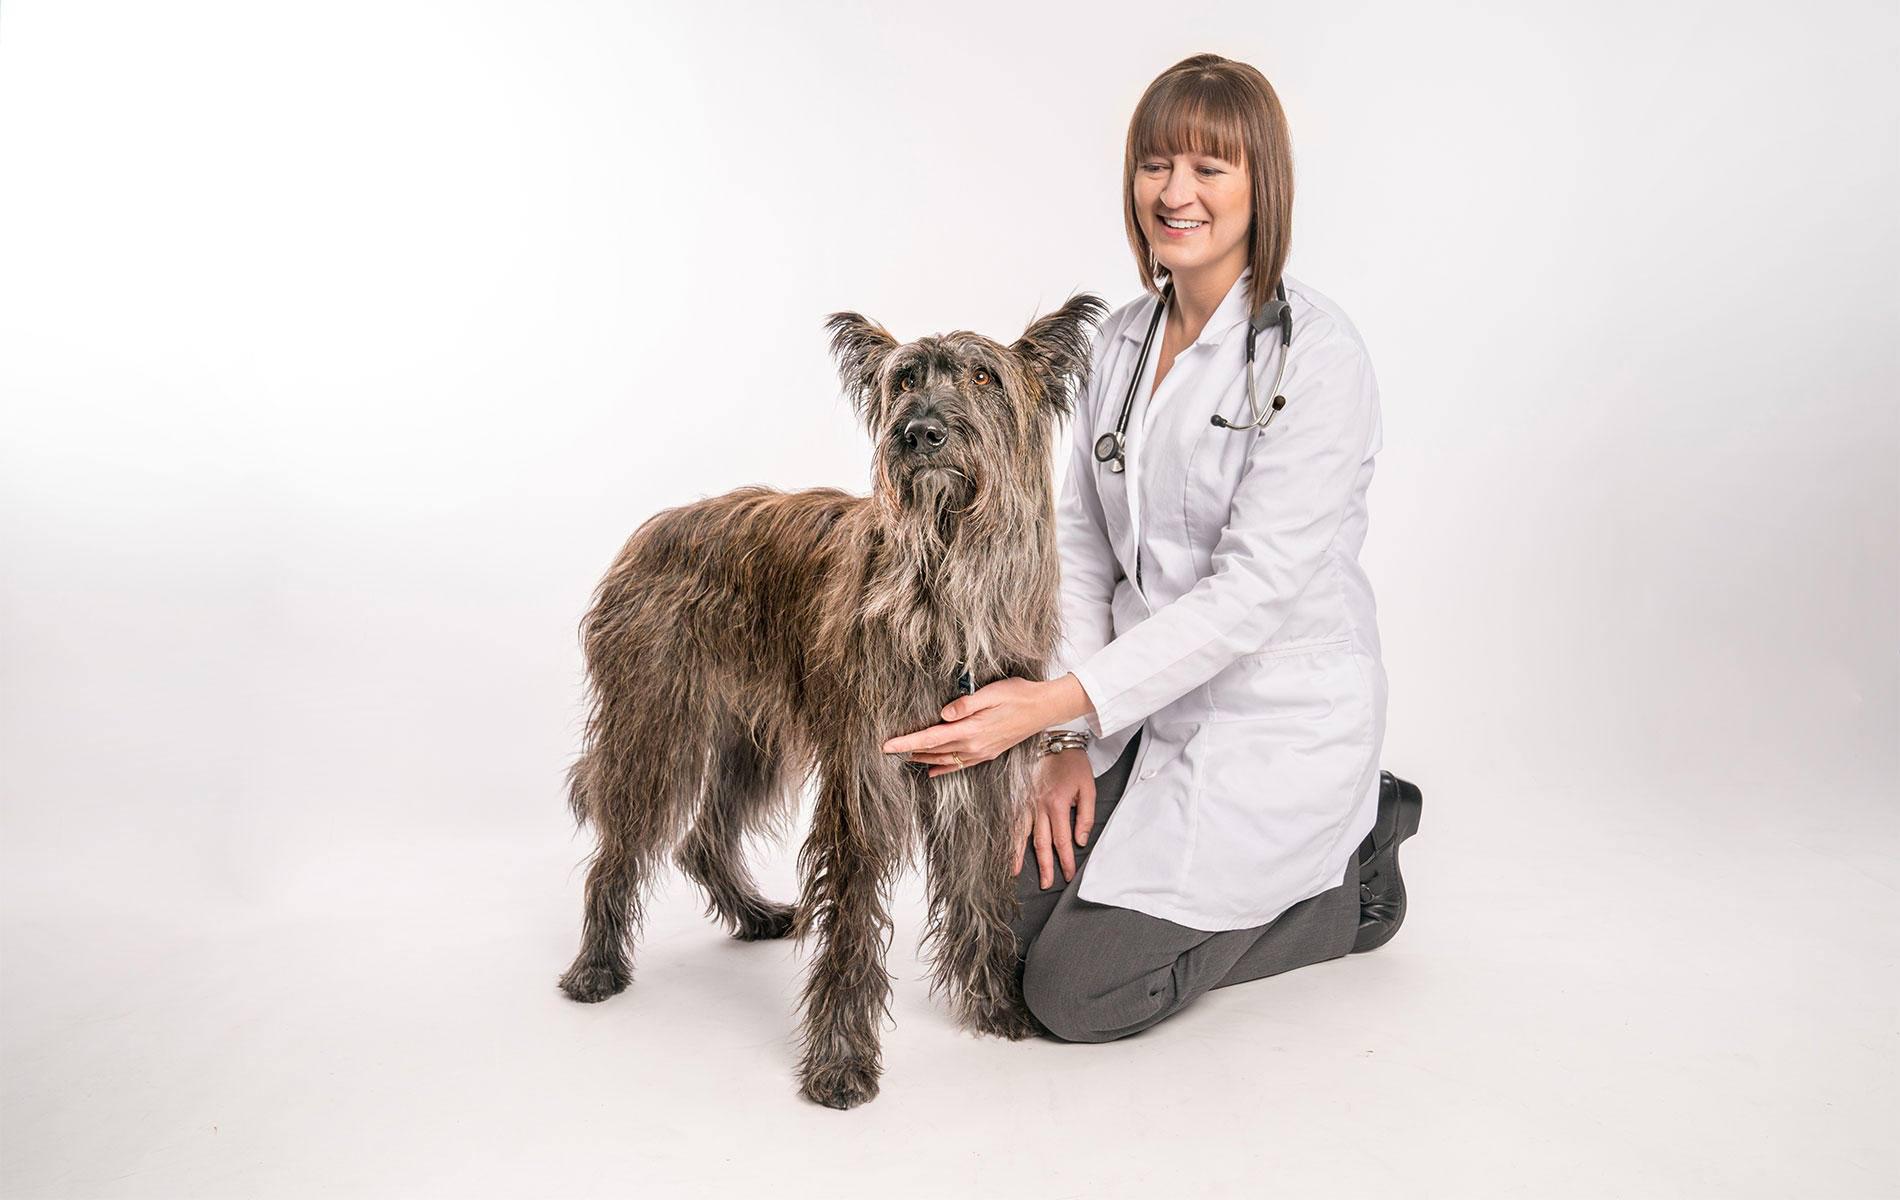 This is Dr. Amy Haarstad with her dog Levi. She also has a cat (Luna) and a gerbil (Elsa). Dr. Haarstad loves pets of all shapes and sizes, including horses!  This includes allergy testing and allergy shots for environmental allergens.  Symptoms of environmental allergies in horses include itching, recurrent skin infections, hives, and heaves.